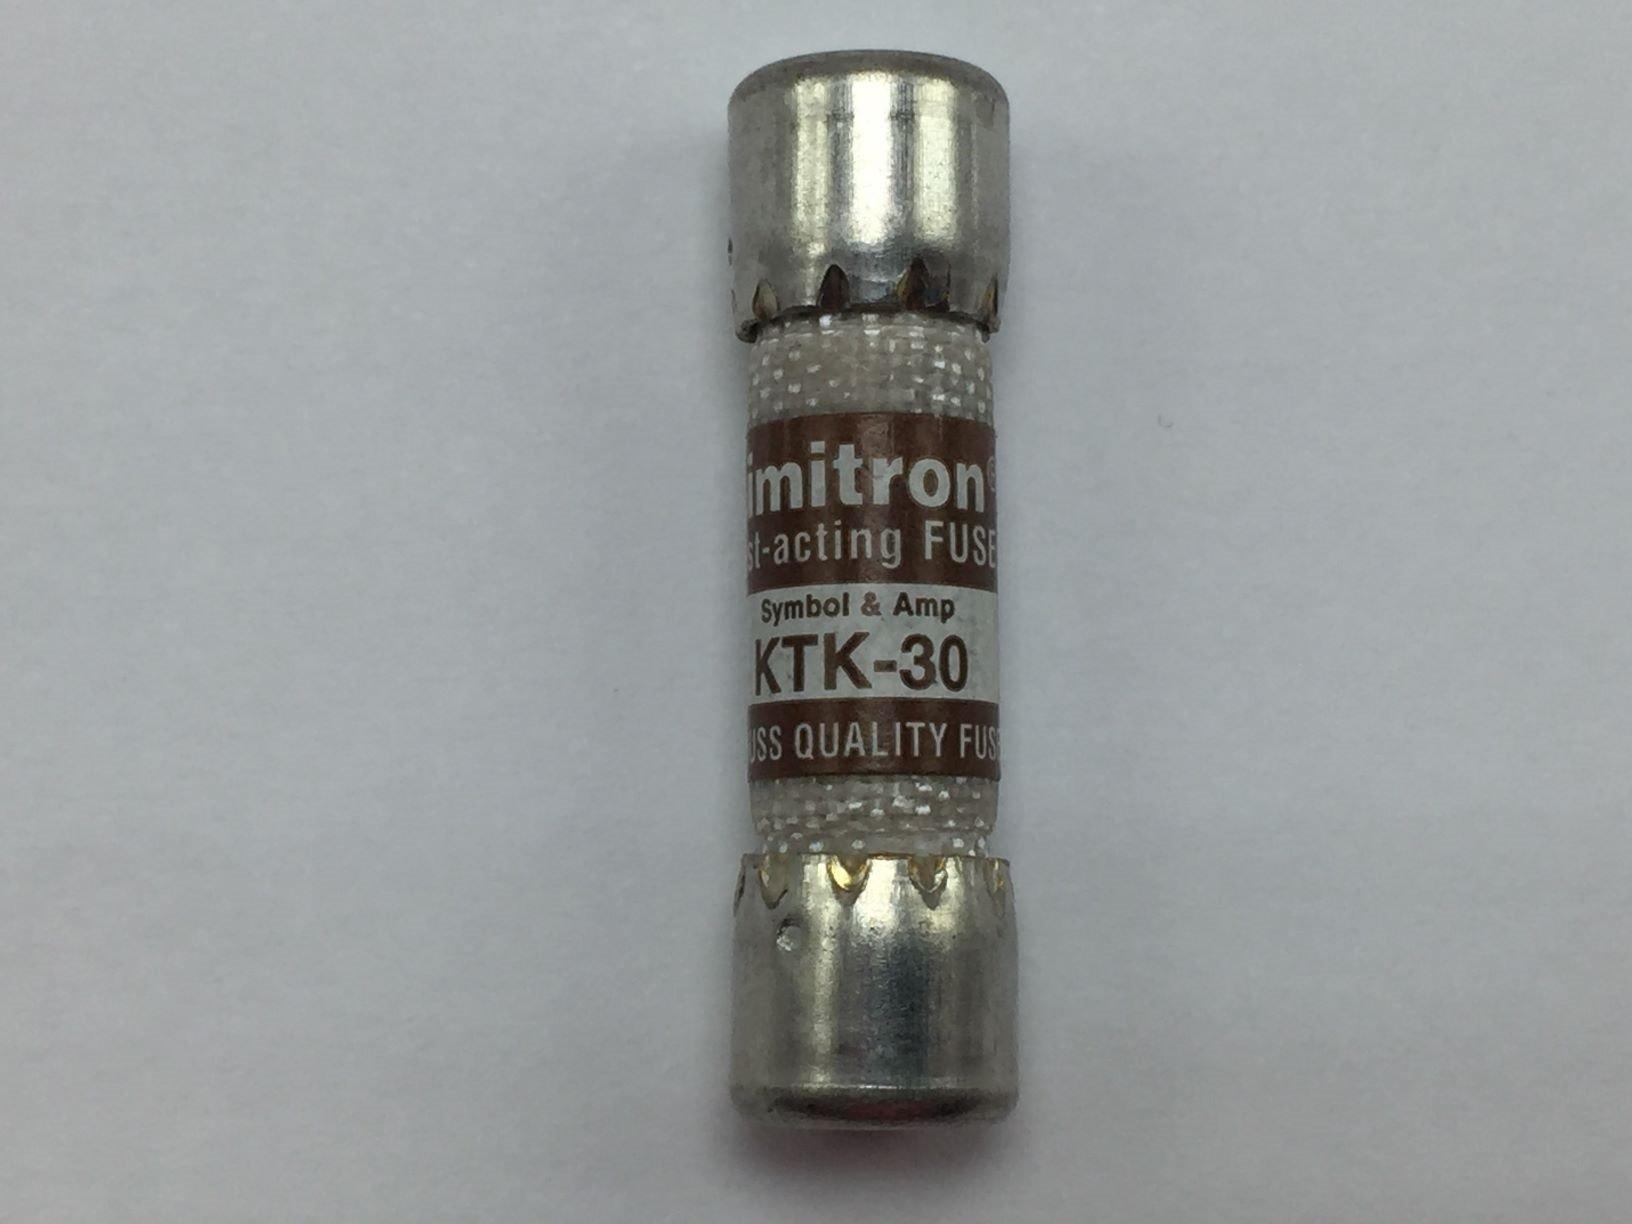 NEW BUSSMANN KTK-30 LIMITRON FAST ACTING FUSE 30A 600V Lot of 3